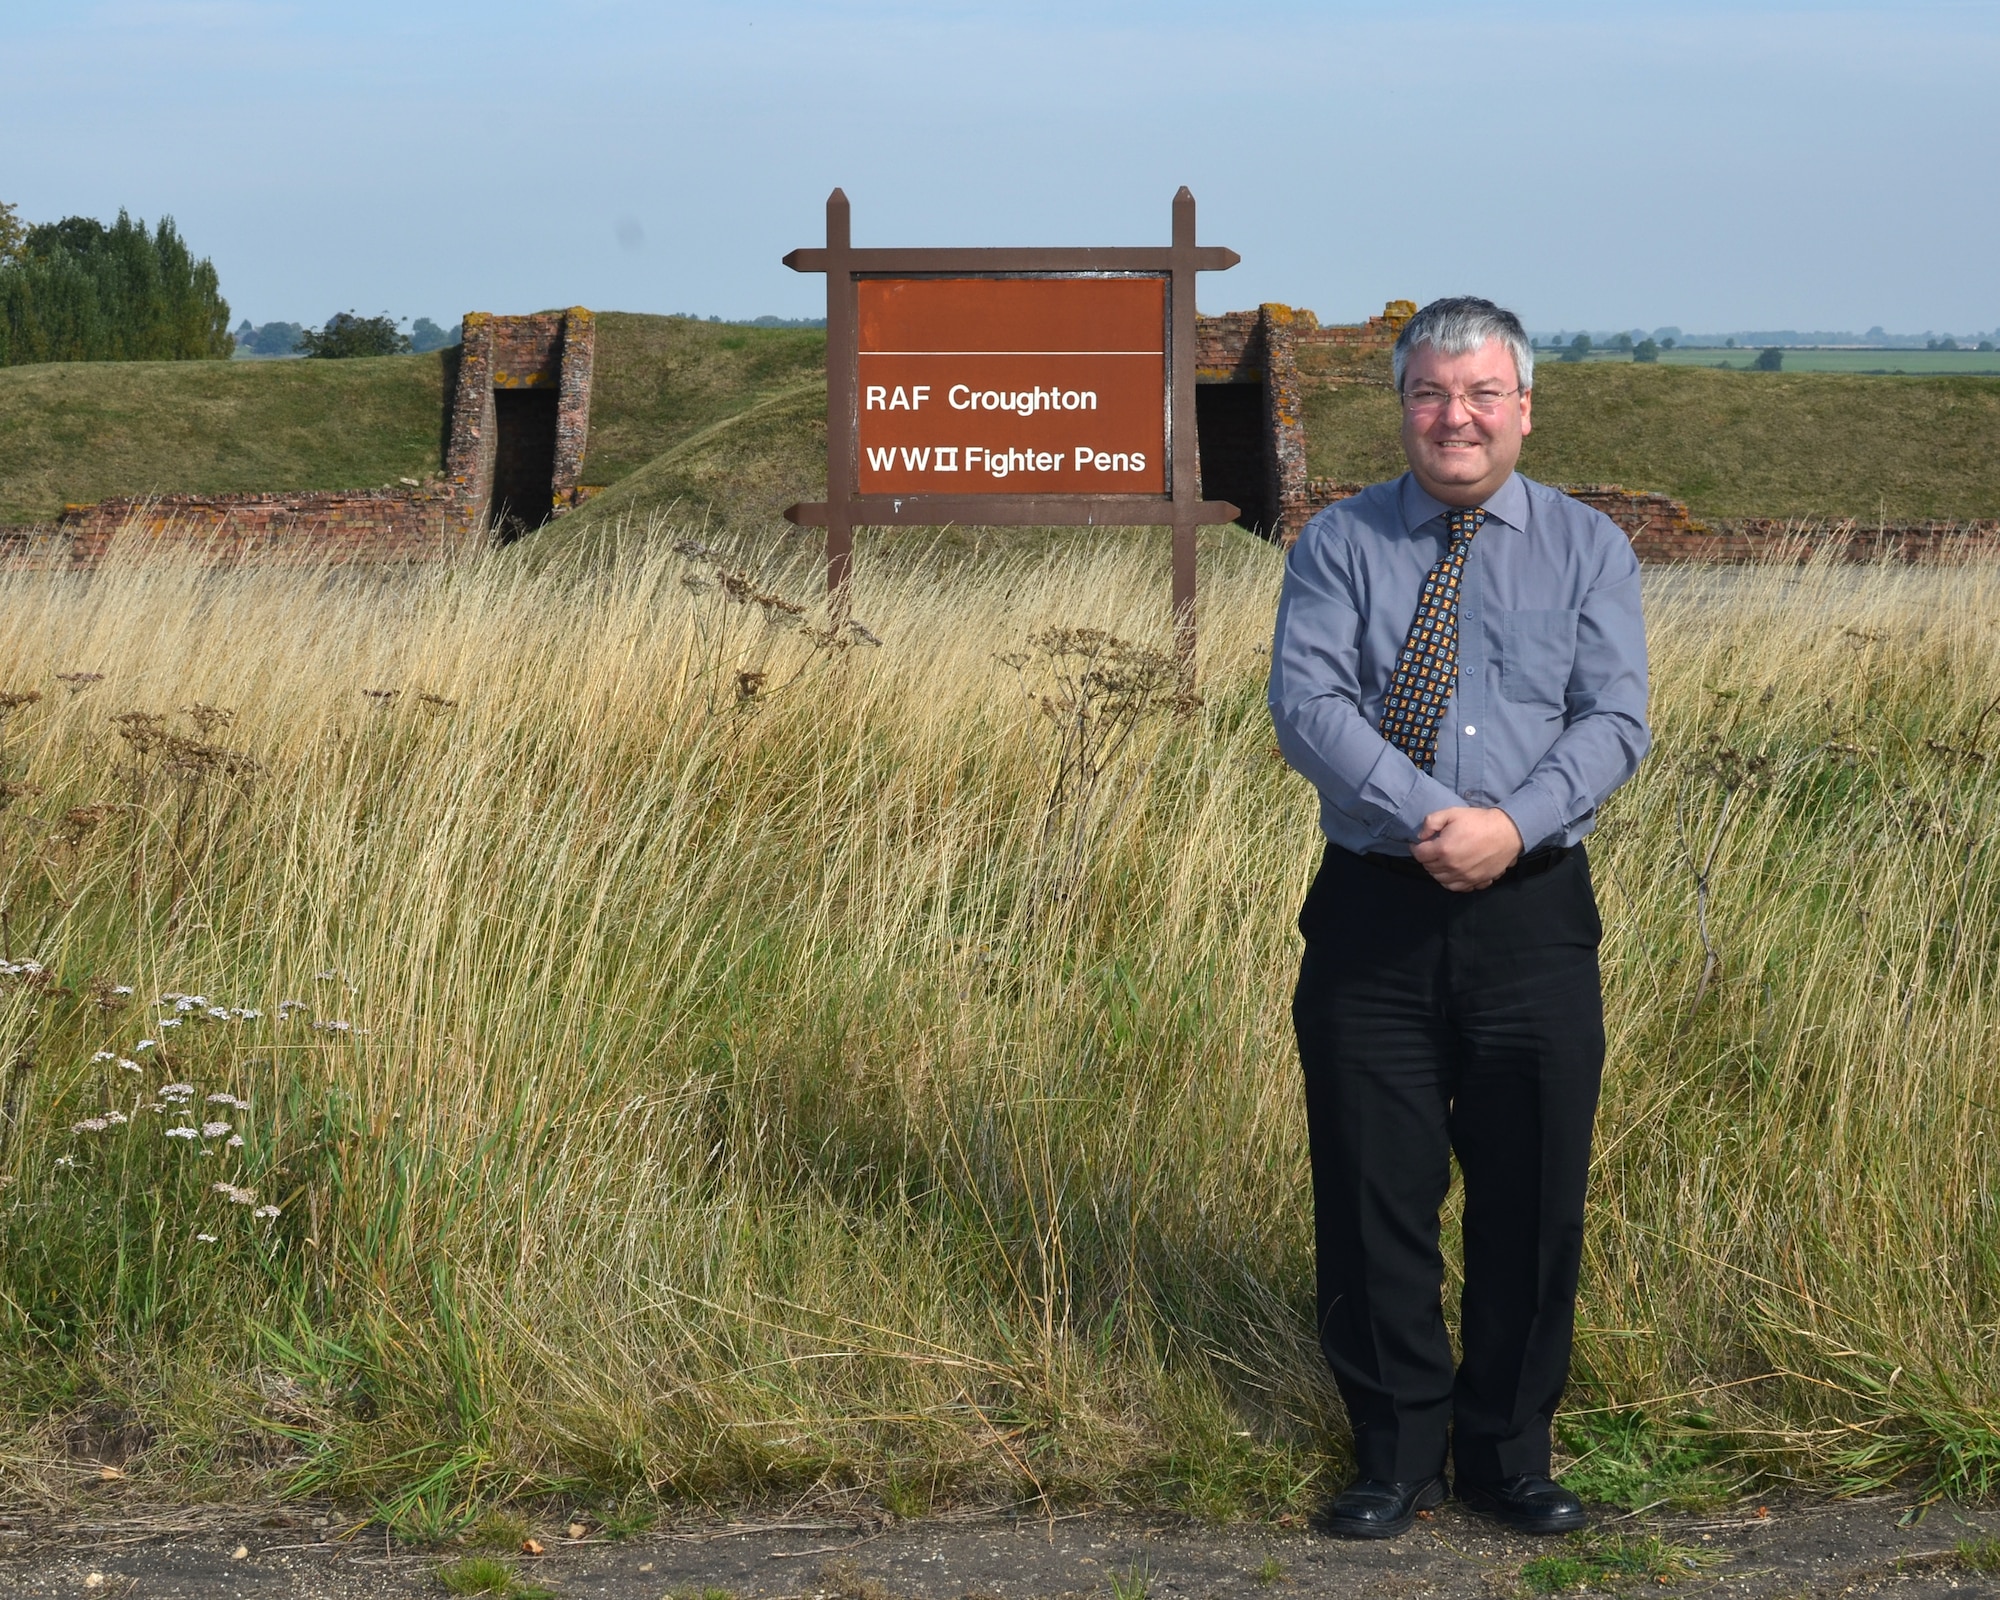 RAF CROUGHTON, United Kingdom - Kevin Bartof has worked for the last two years to get the World War II fighter pens here recognized by the English Heritage Foundation. The pens were built when RAF Croughton was called RAF Brackley 70 years ago. (U.S. Air Force photo by Senior Airman Joel Mease)